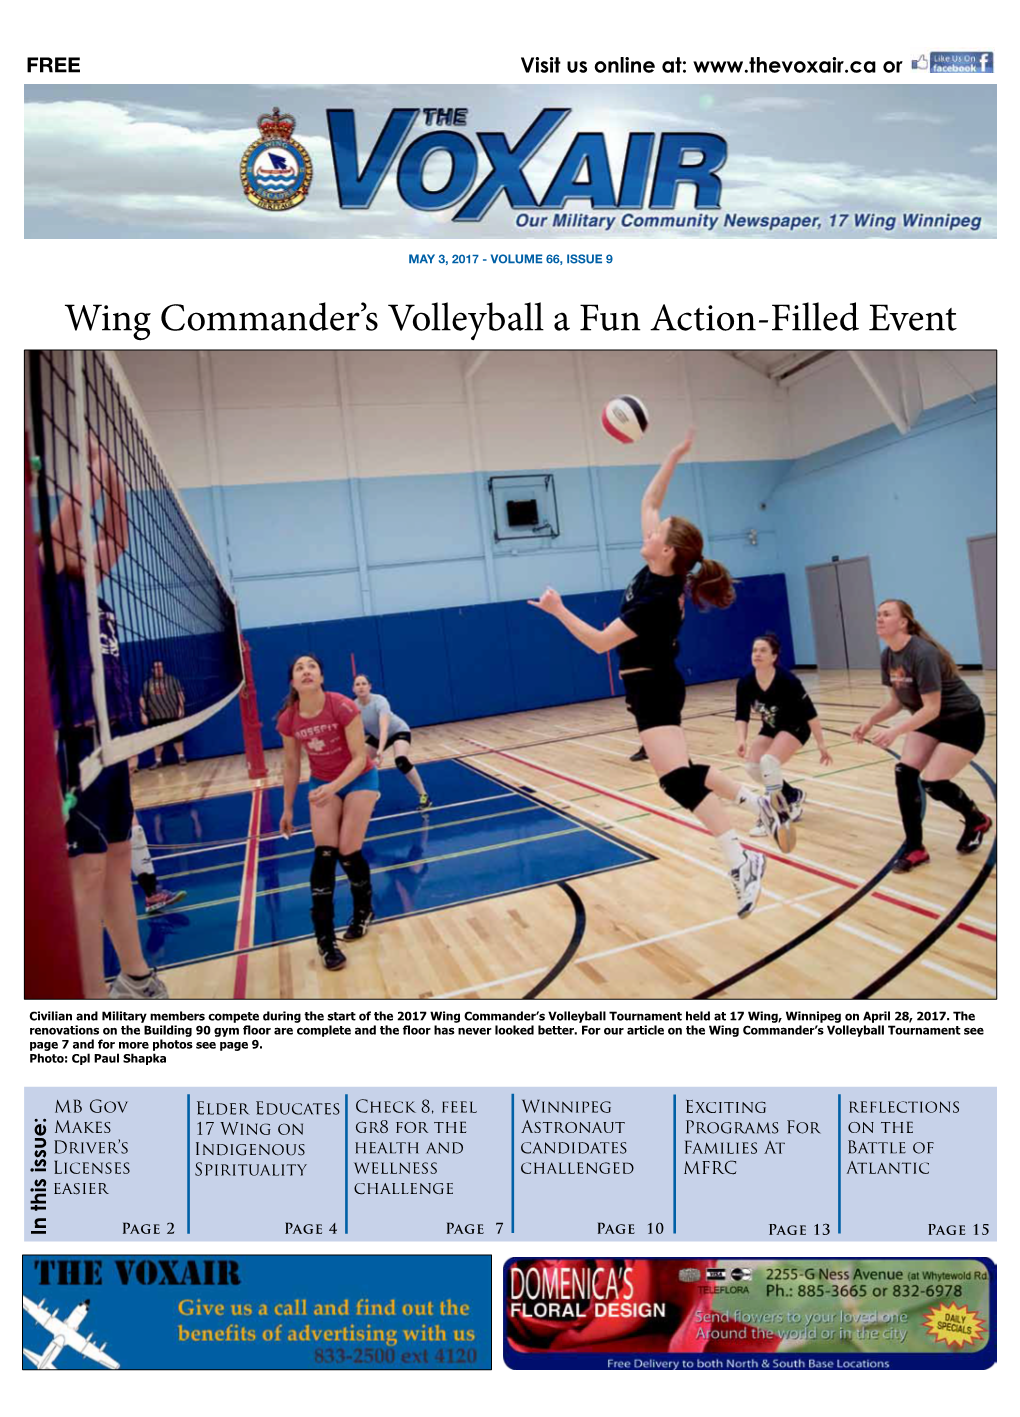 Wing Commander's Volleyball a Fun Action-Filled Event